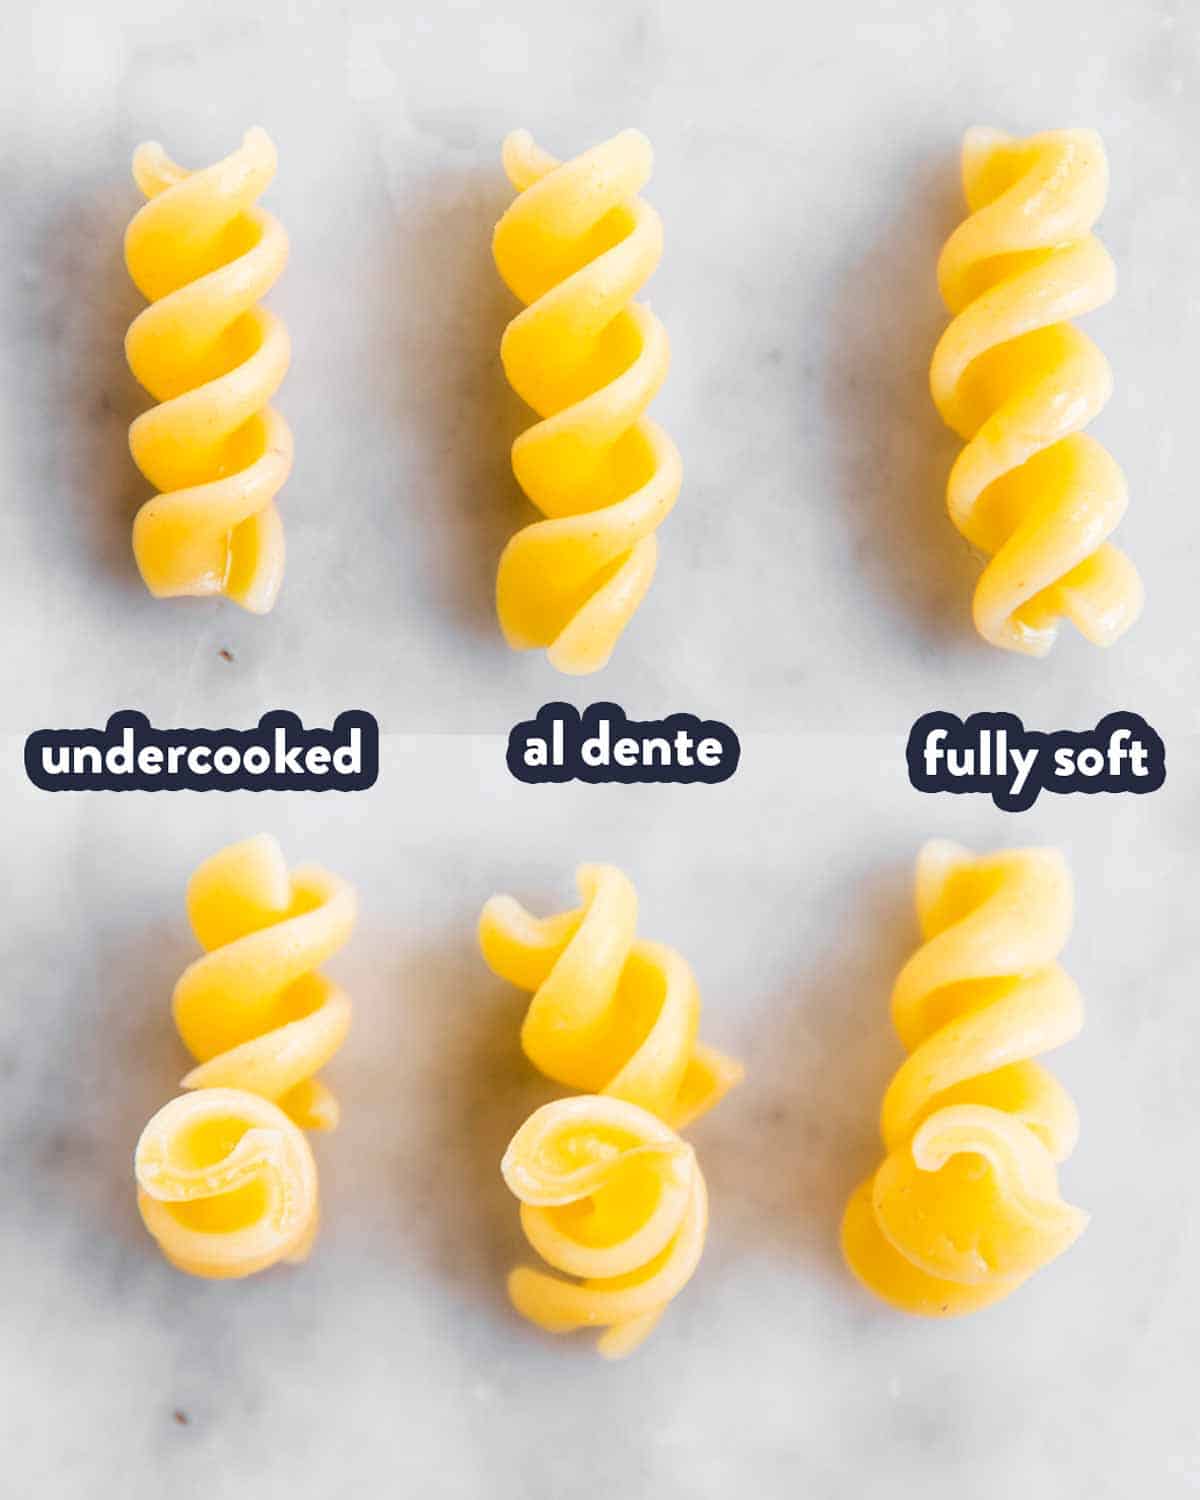 comparison of three differently cooked pasta spirals (undercooked, al dente and soft)